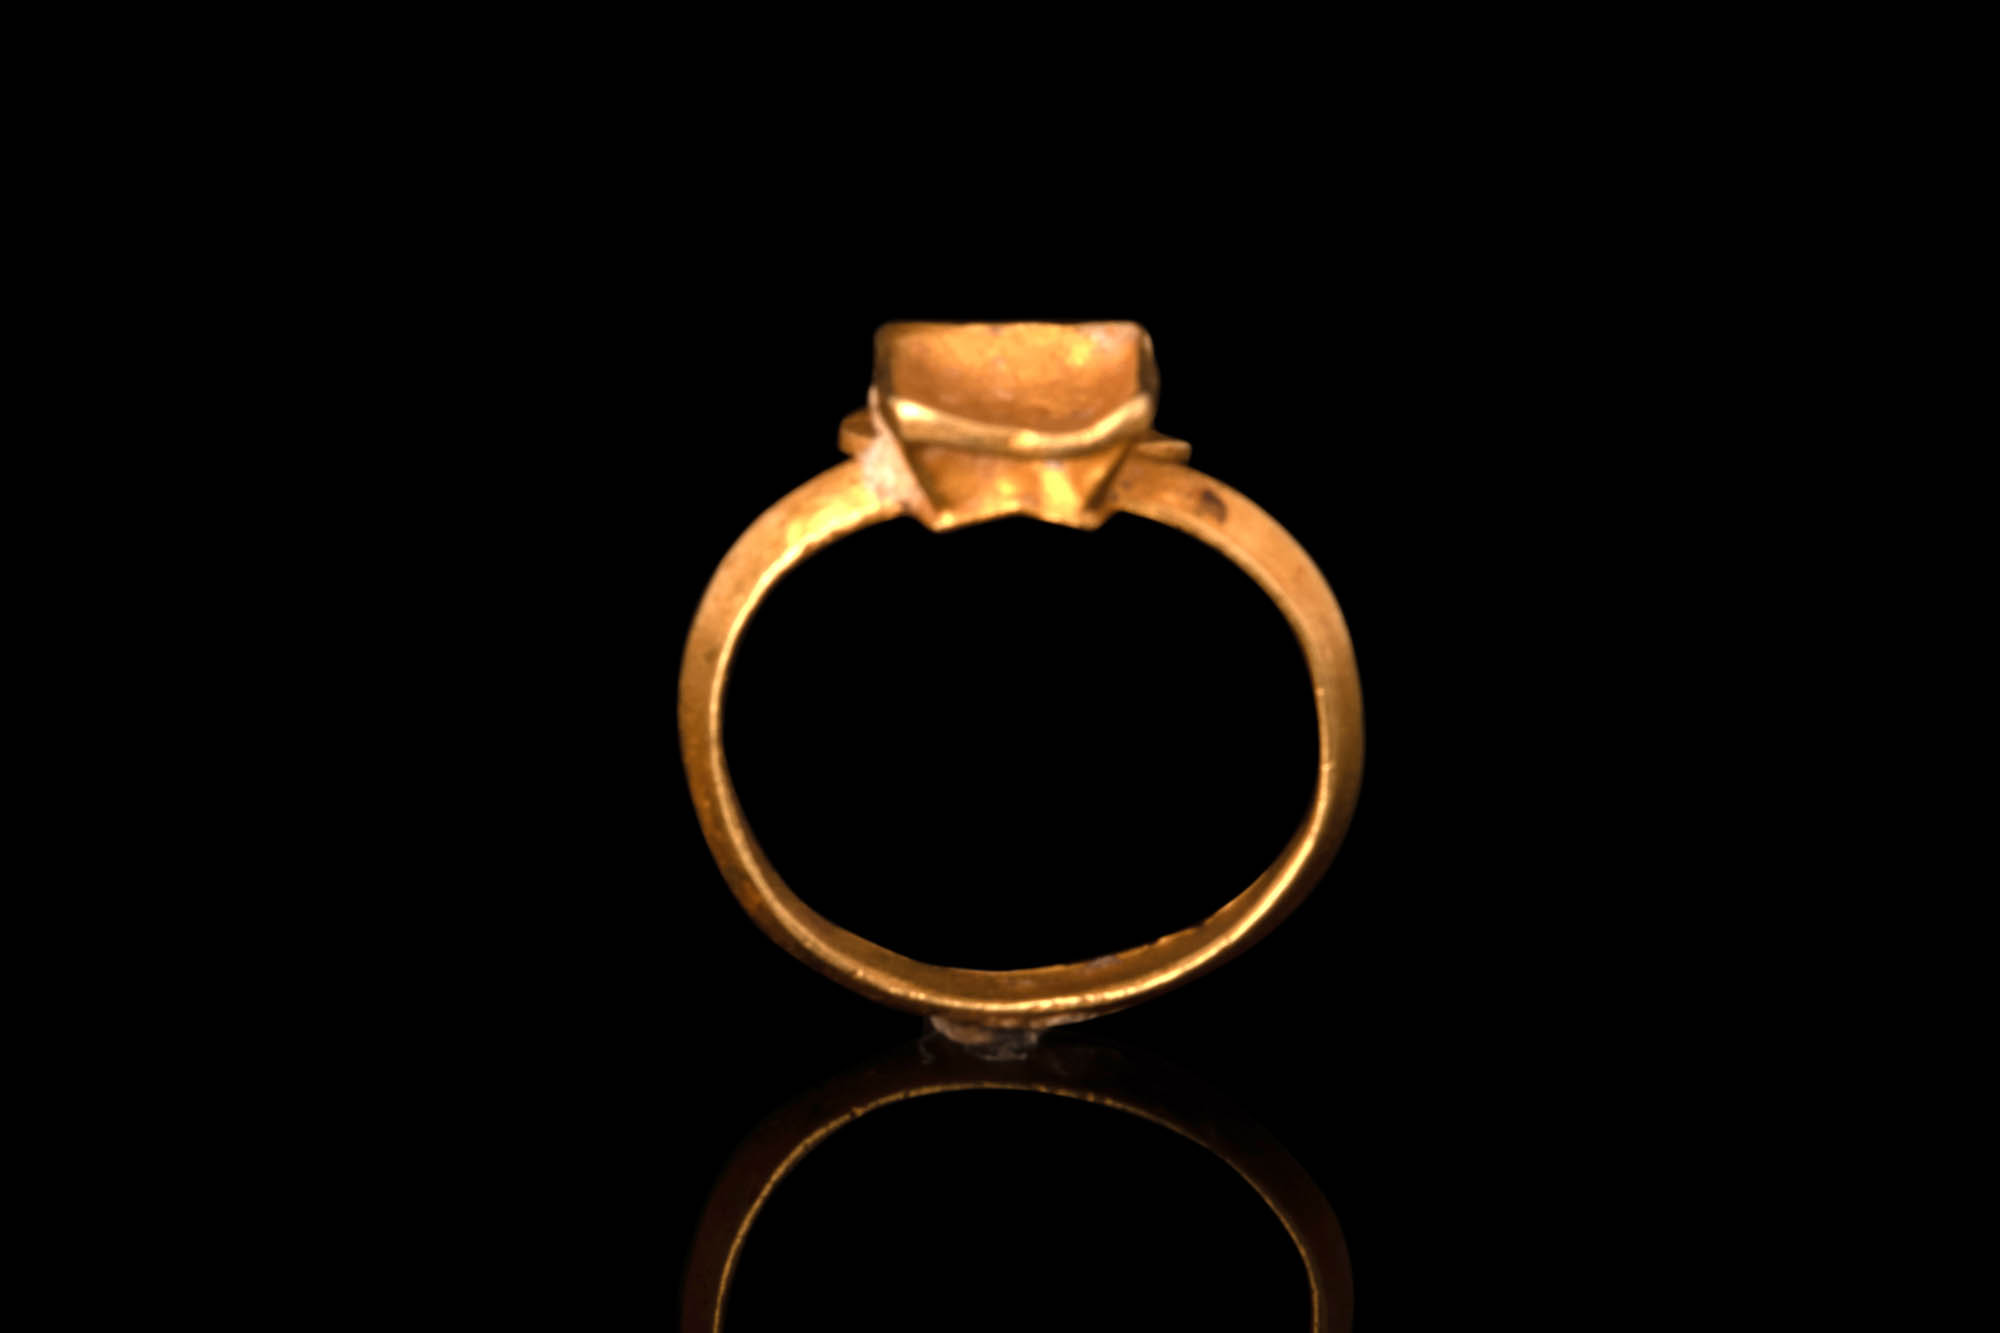 ROMAN GOLD RING DECORATE WITH VOLUTES - Image 5 of 5